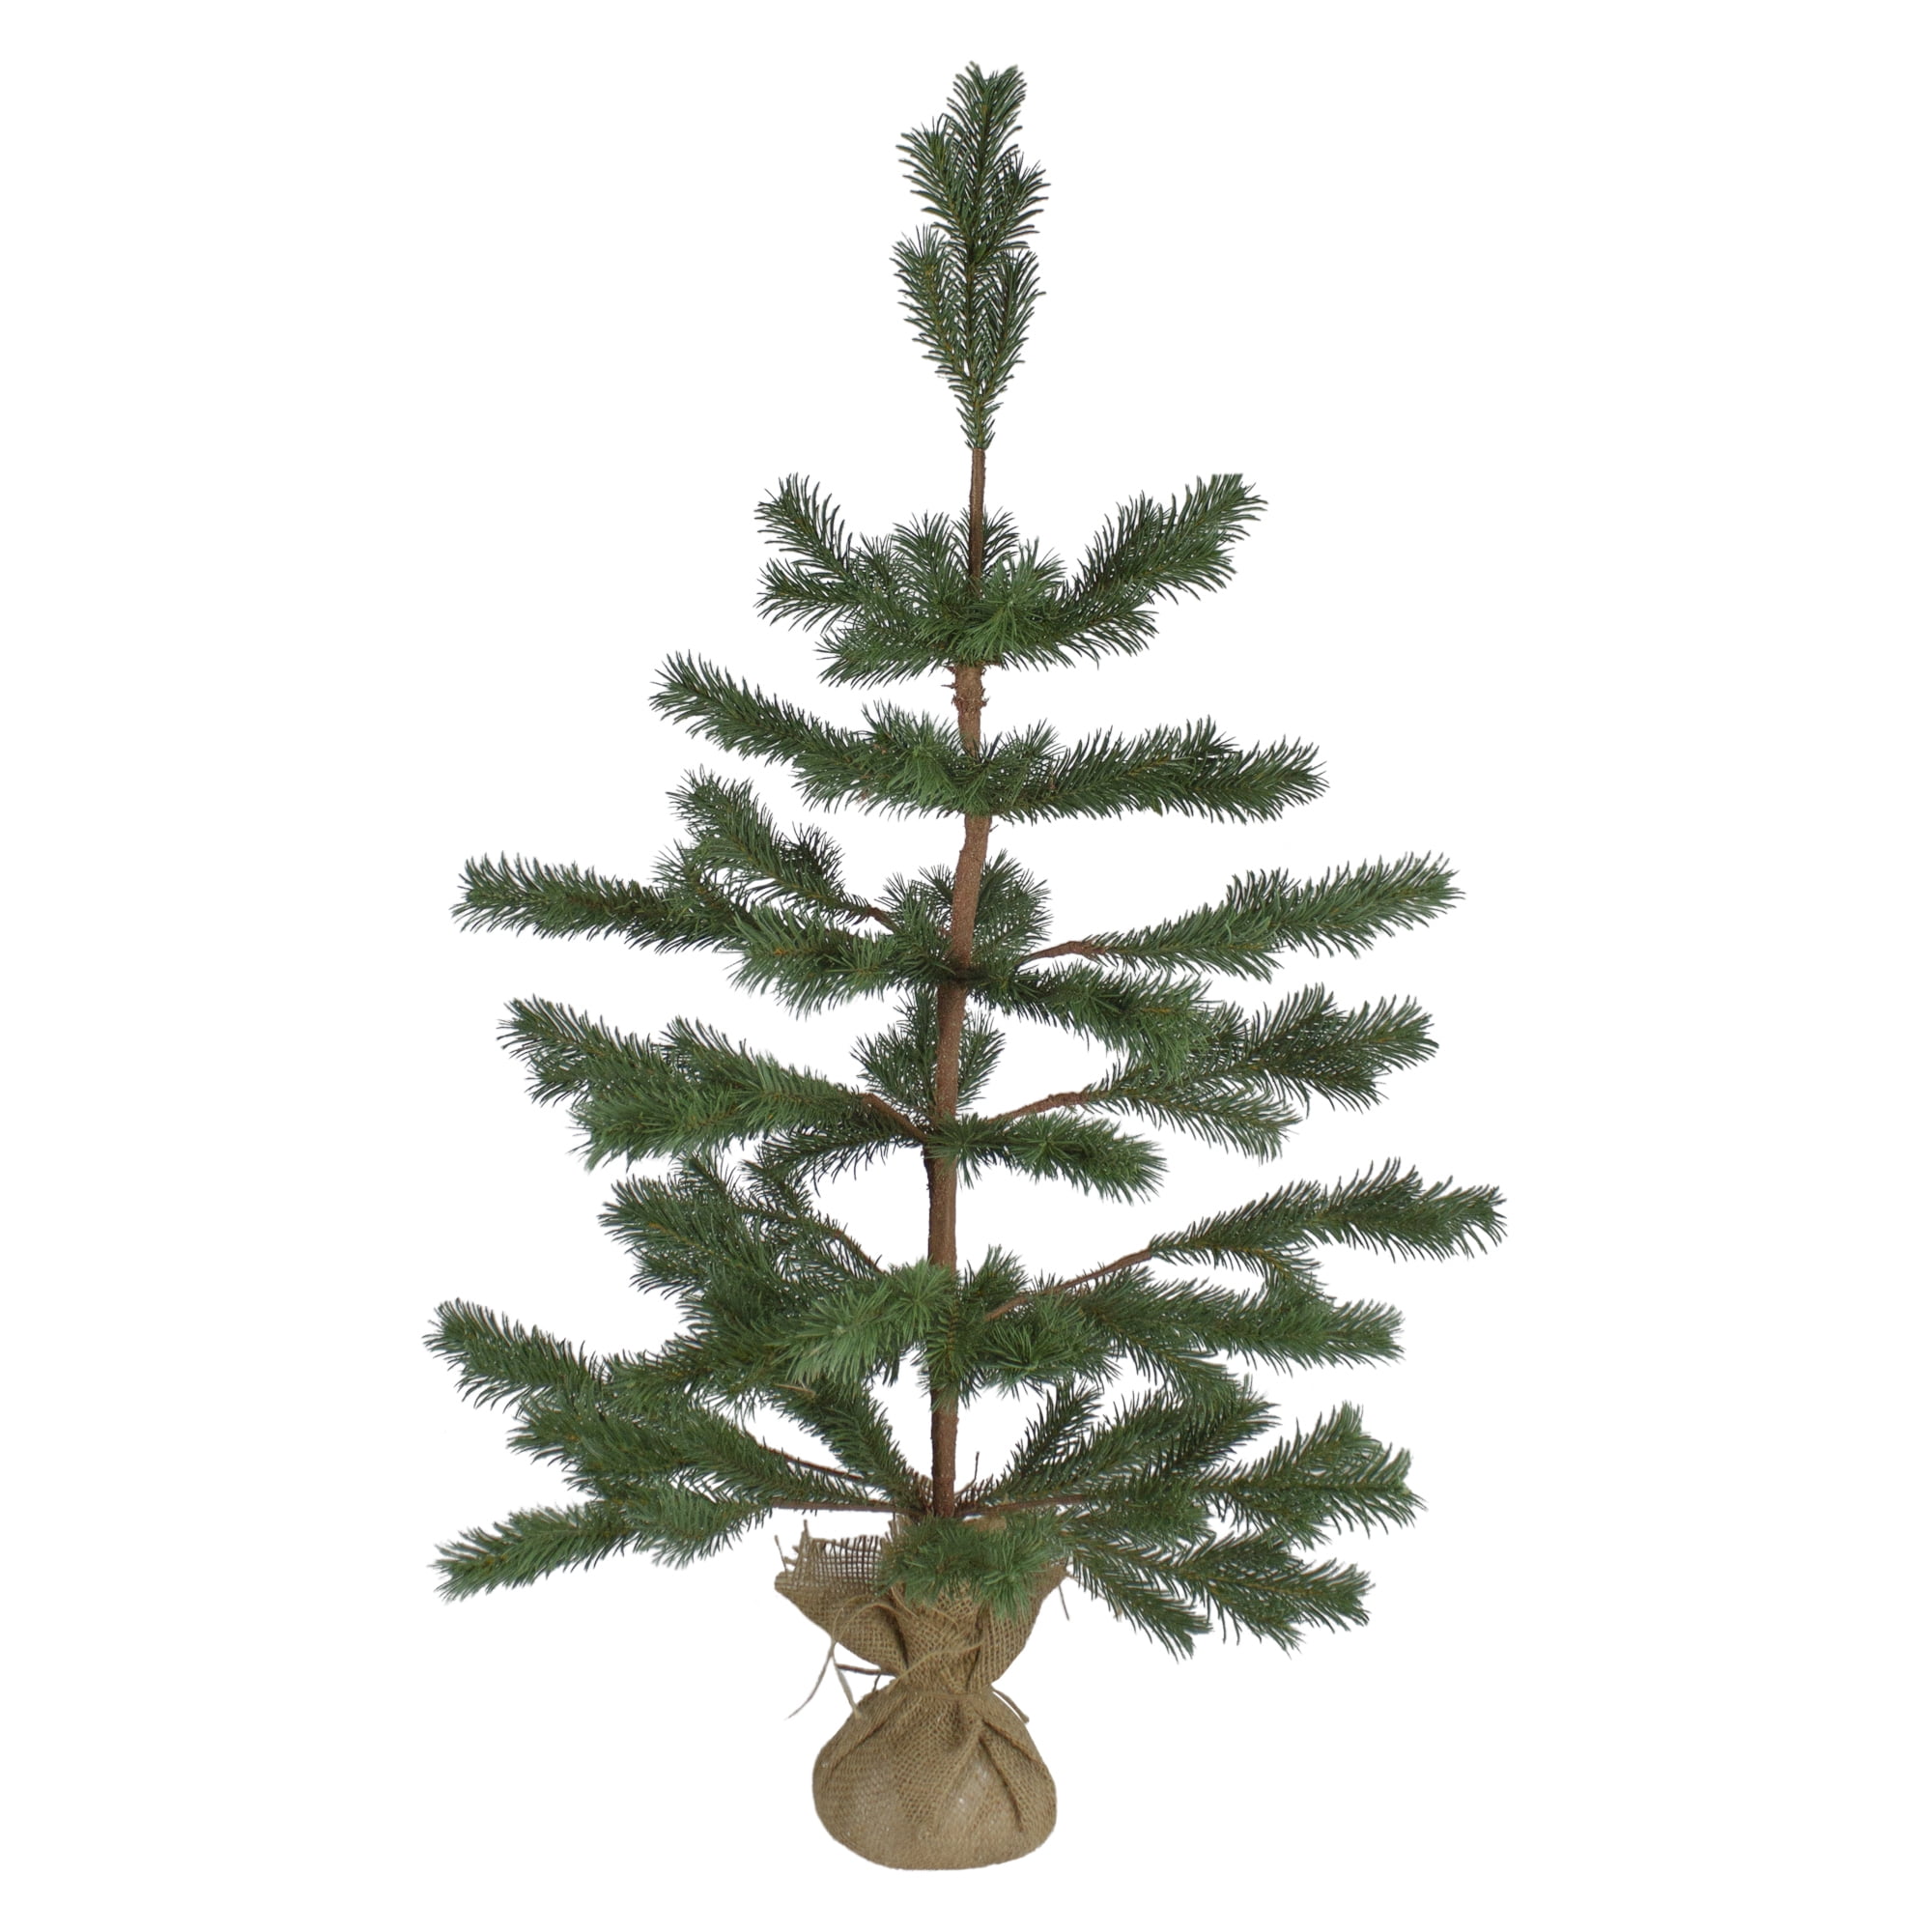 21 Inch Rustic Green Miniature Artificial Tree Unlit for Table Top Window Sill Desk Easy to Decorate Counter Top Holiday Essence Tabletop Mini Christmas Tree